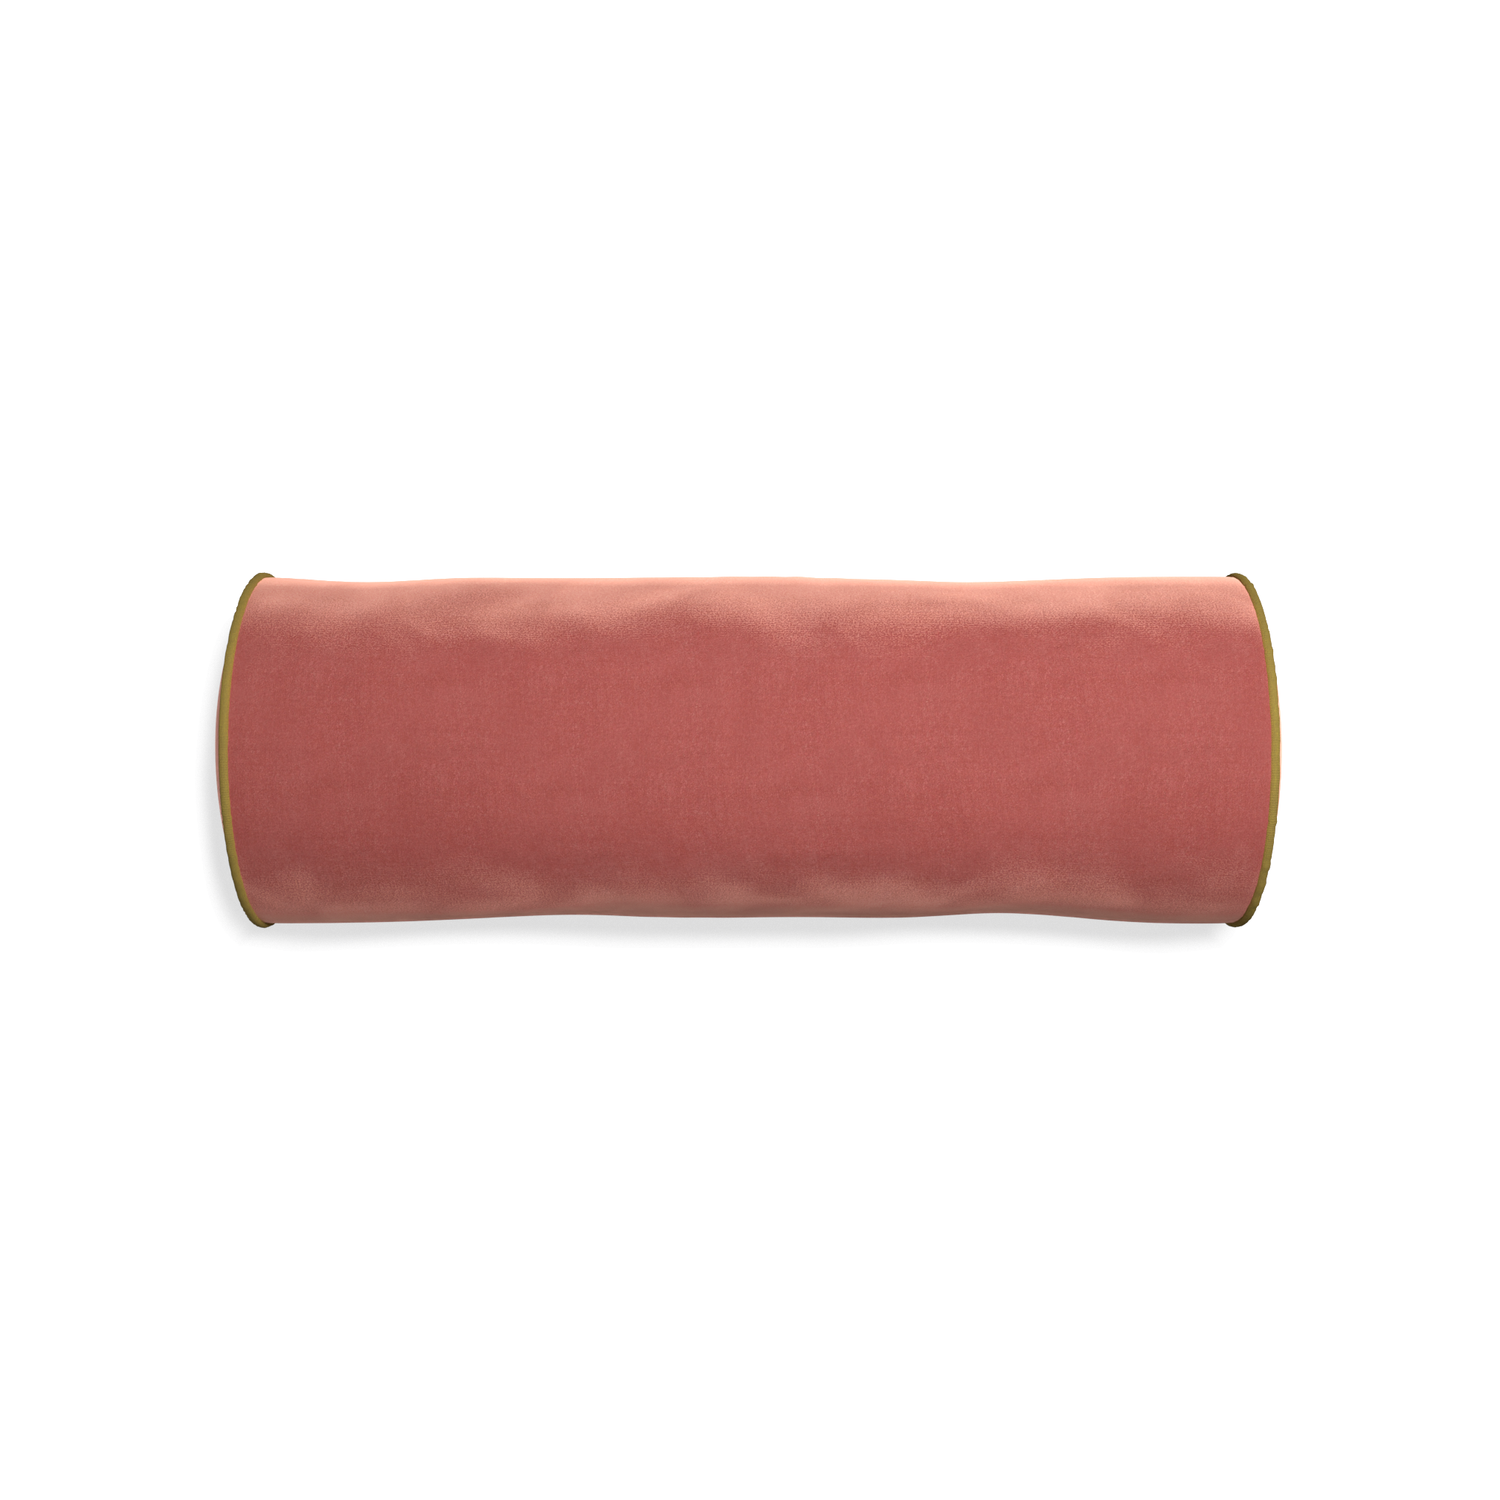 Bolster cosmo velvet custom coralpillow with c piping on white background